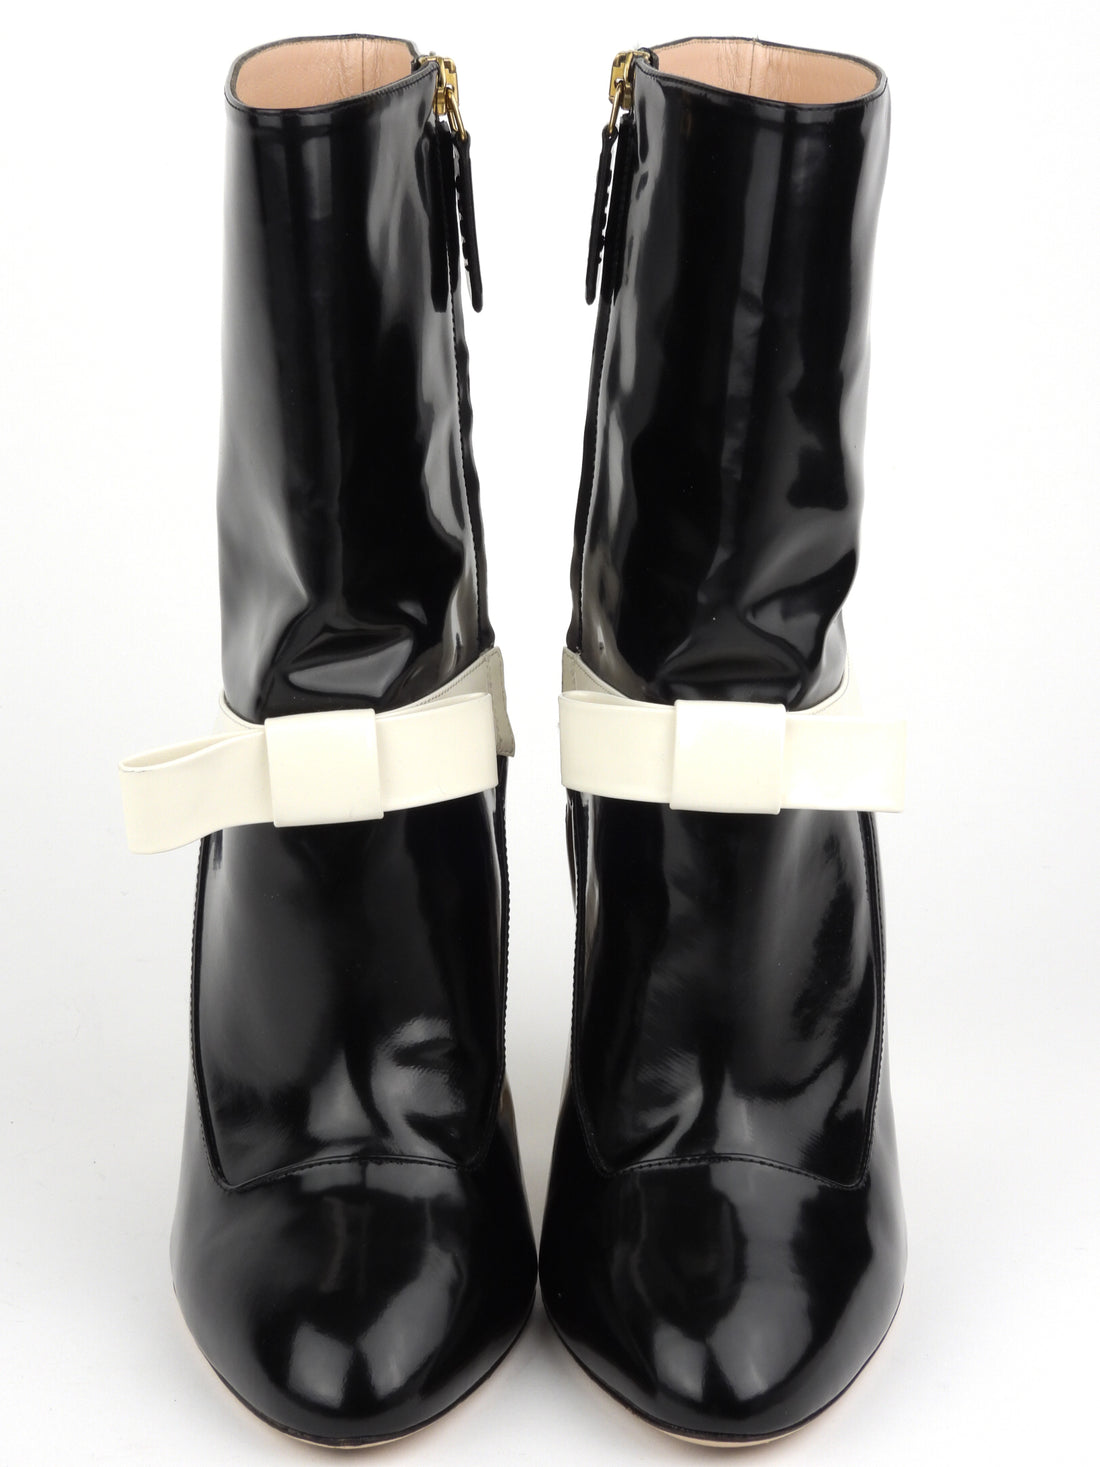 Gucci Black and White Patent Leather Nimue Mid-Calf Gogo Boots - 39